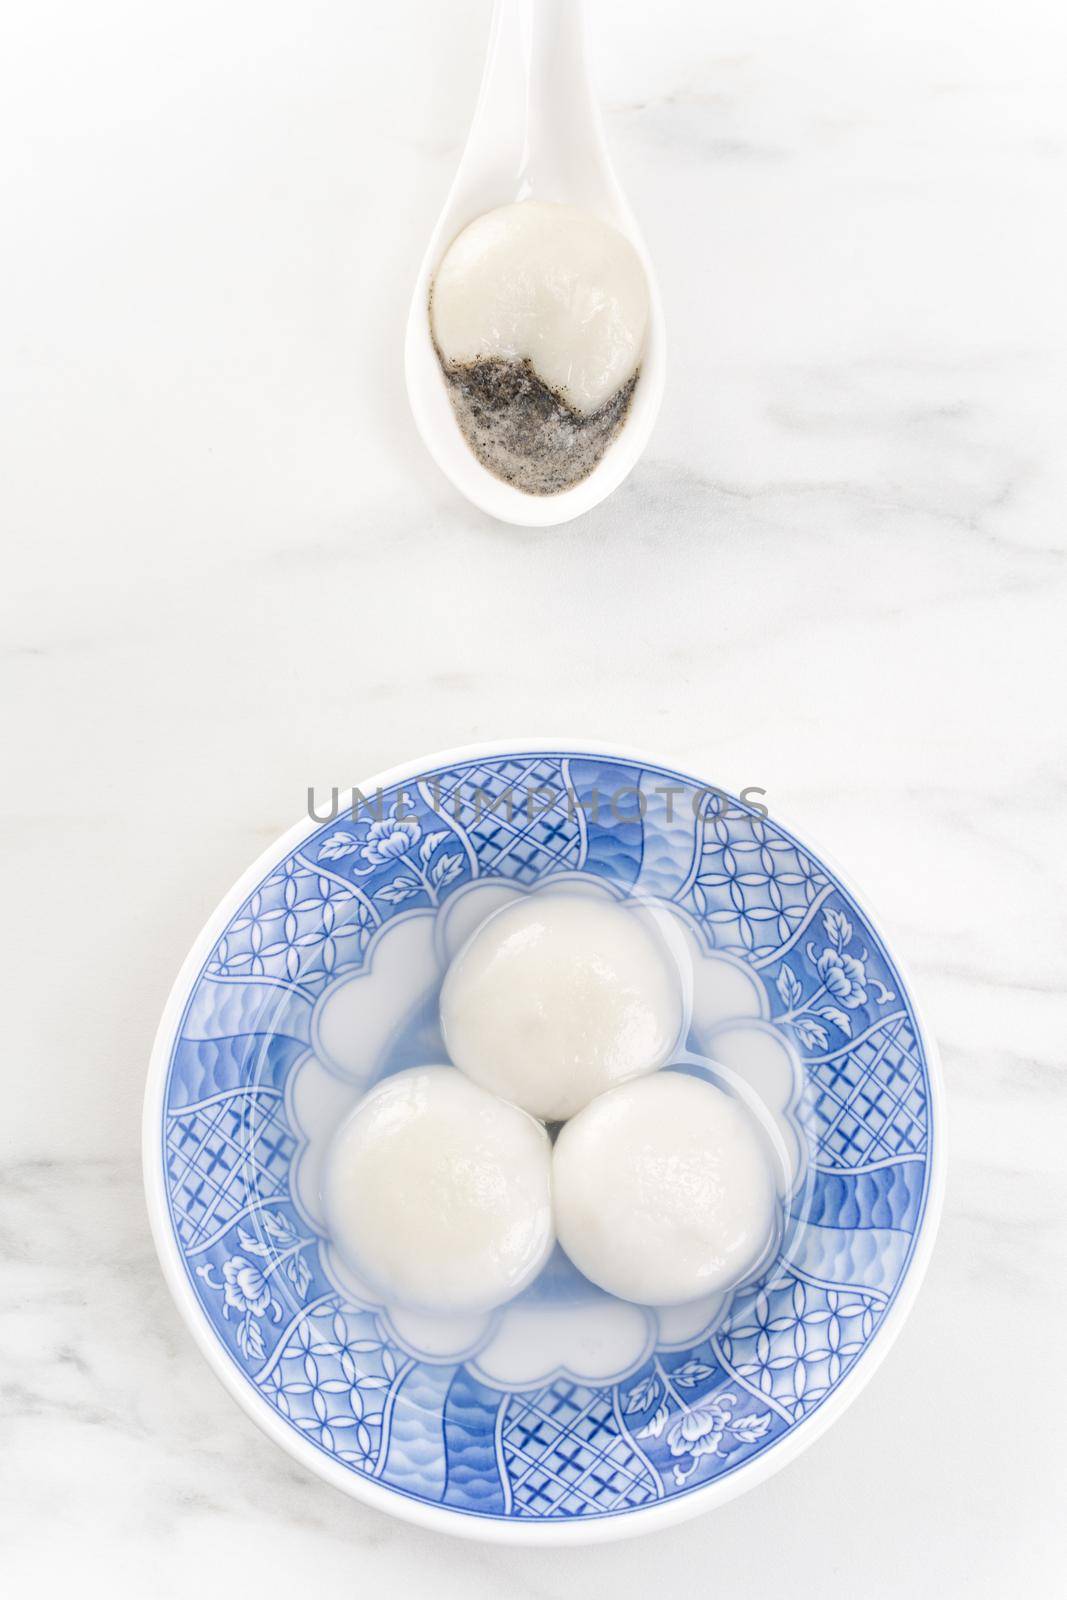 Tang yuan, tangyuan, yuanxiao in a small bowl stuffed with sesame fillings, top view, flat lay. Delicious asian food rice dumpling balls for festival.